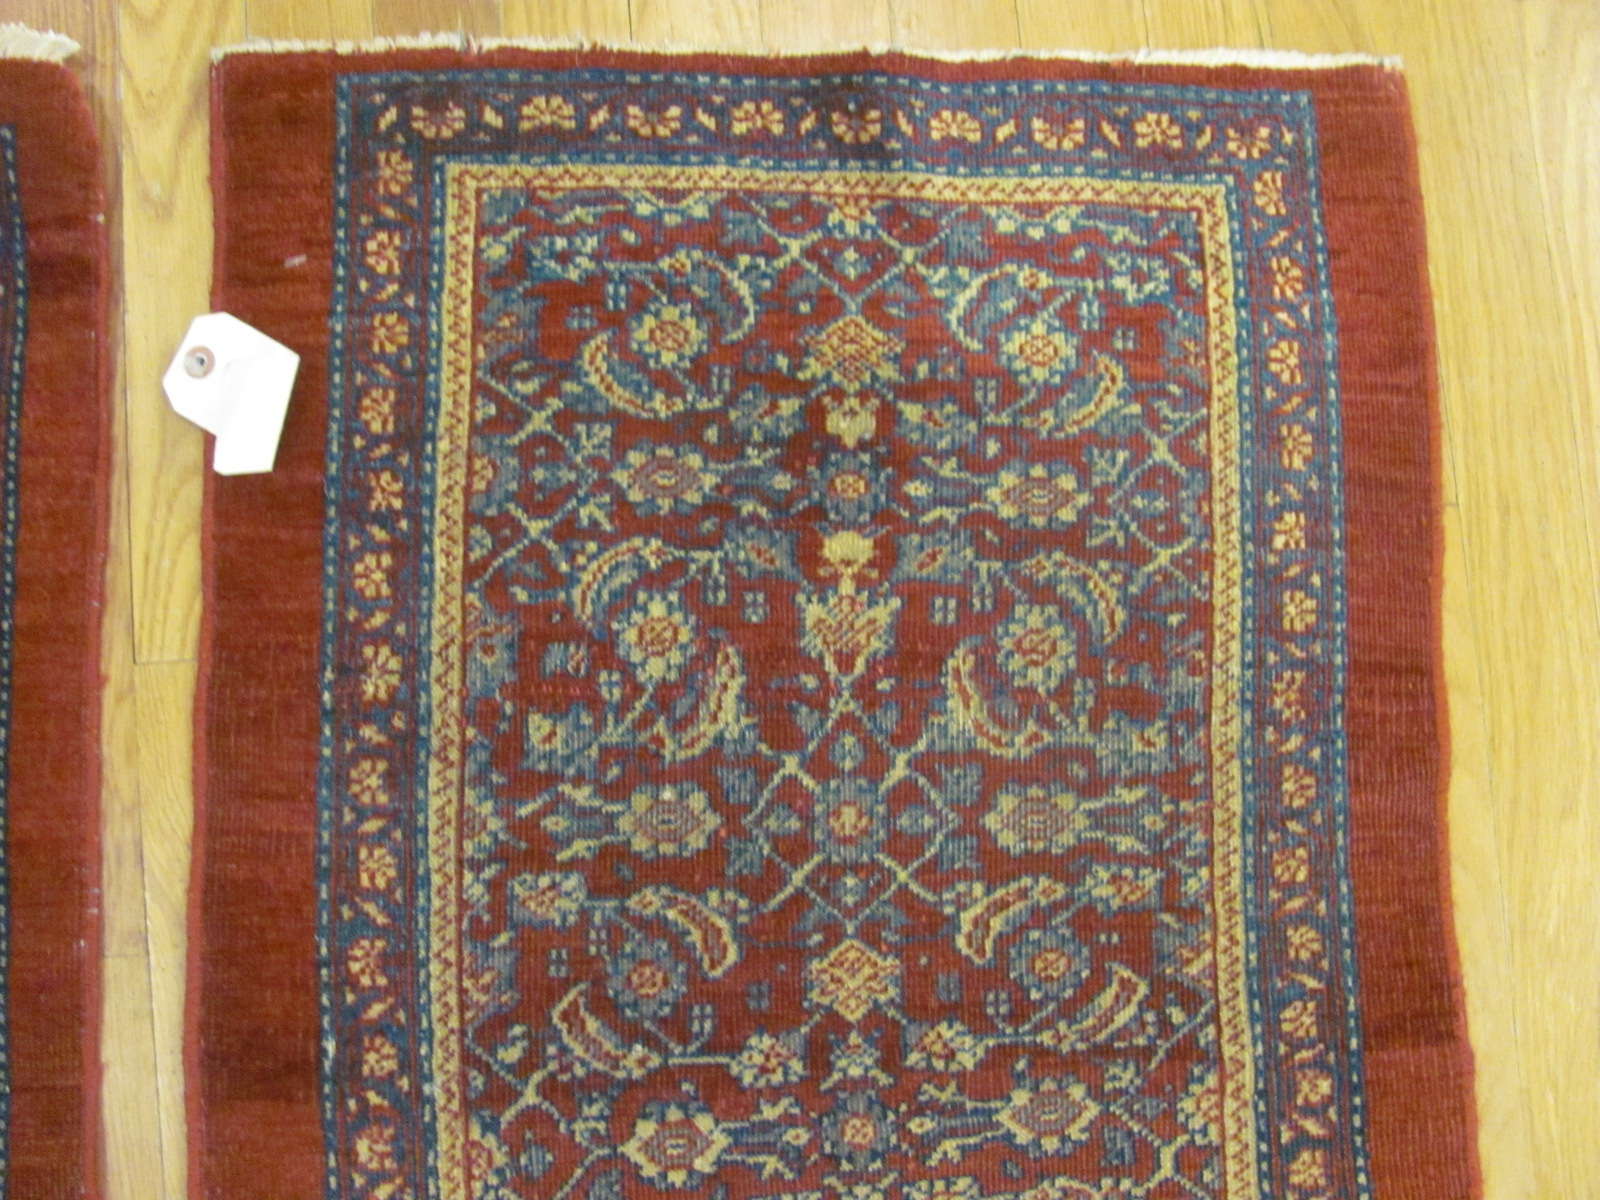 24831 a pair of antique persian mahal rugs 2 x 3 each-1